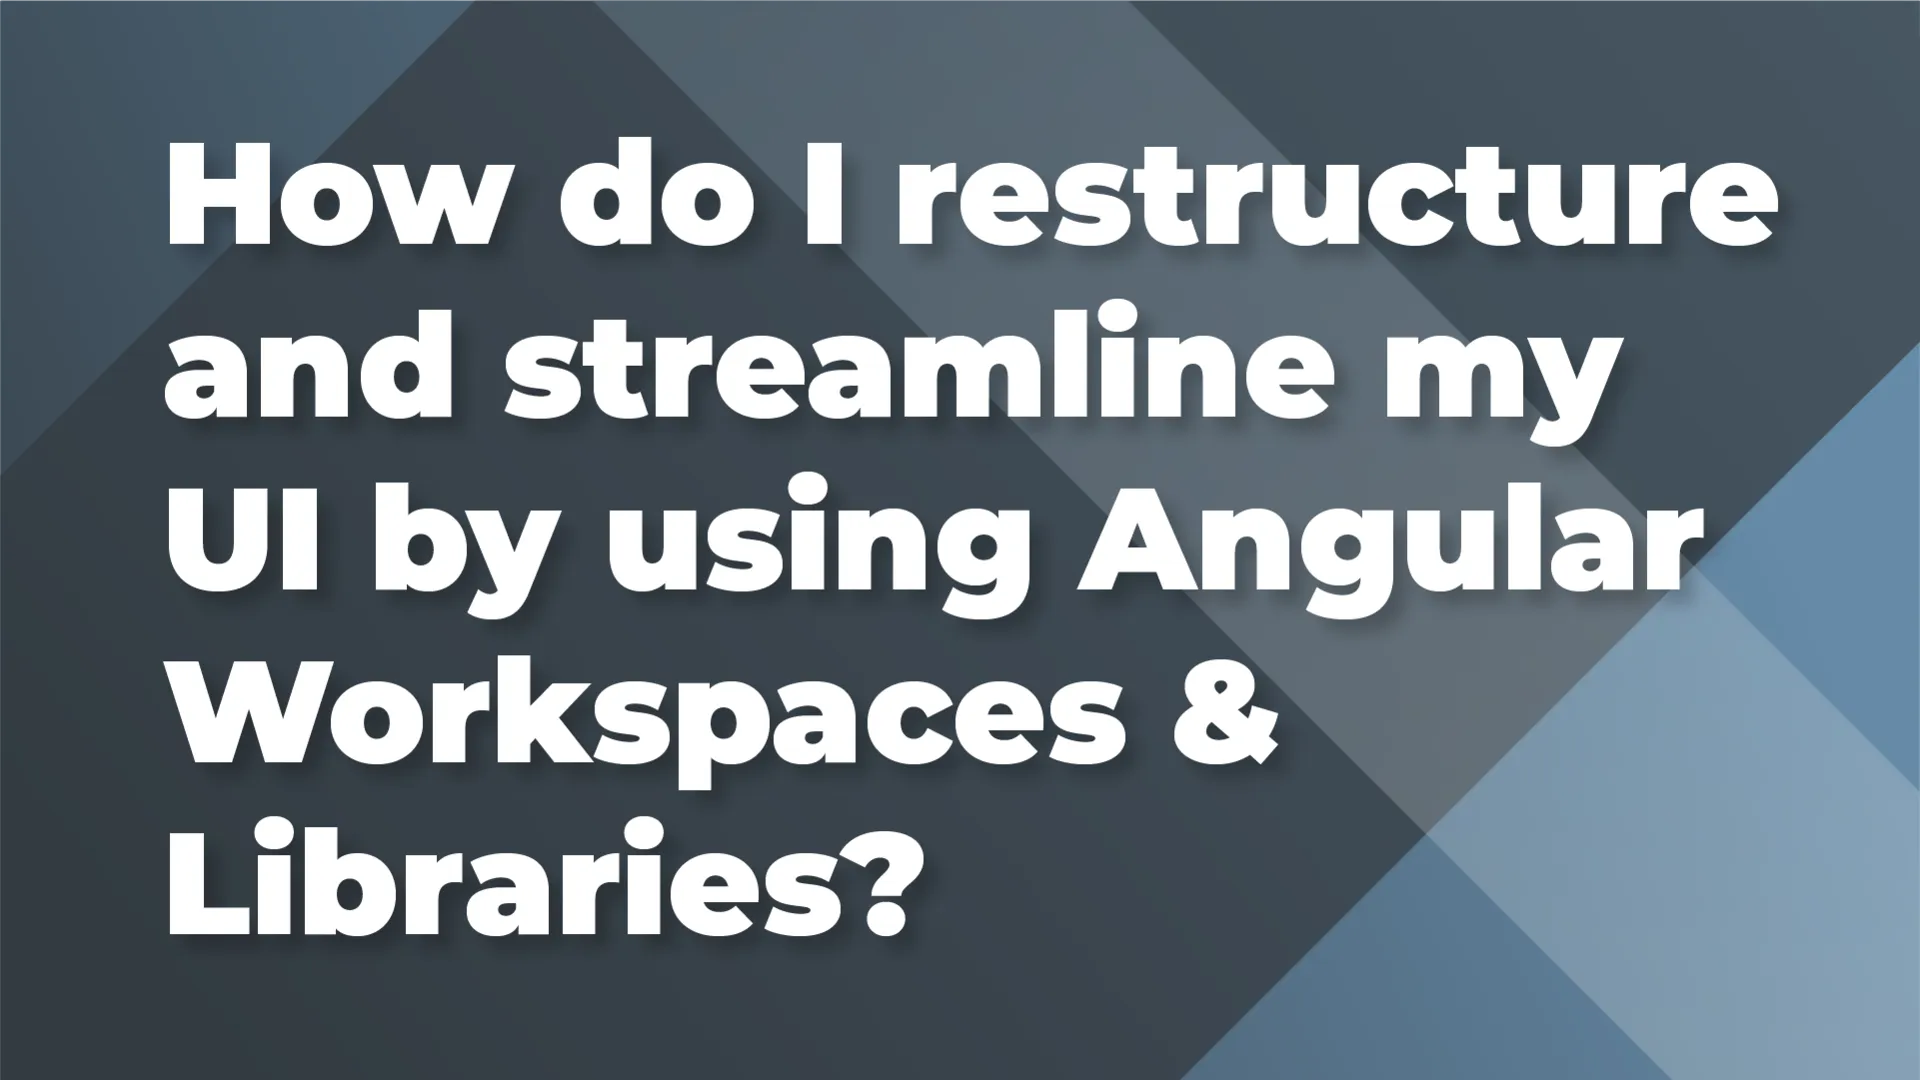 How do I restructure and streamline my UI by using Angular Workspaces &amp; Libraries?